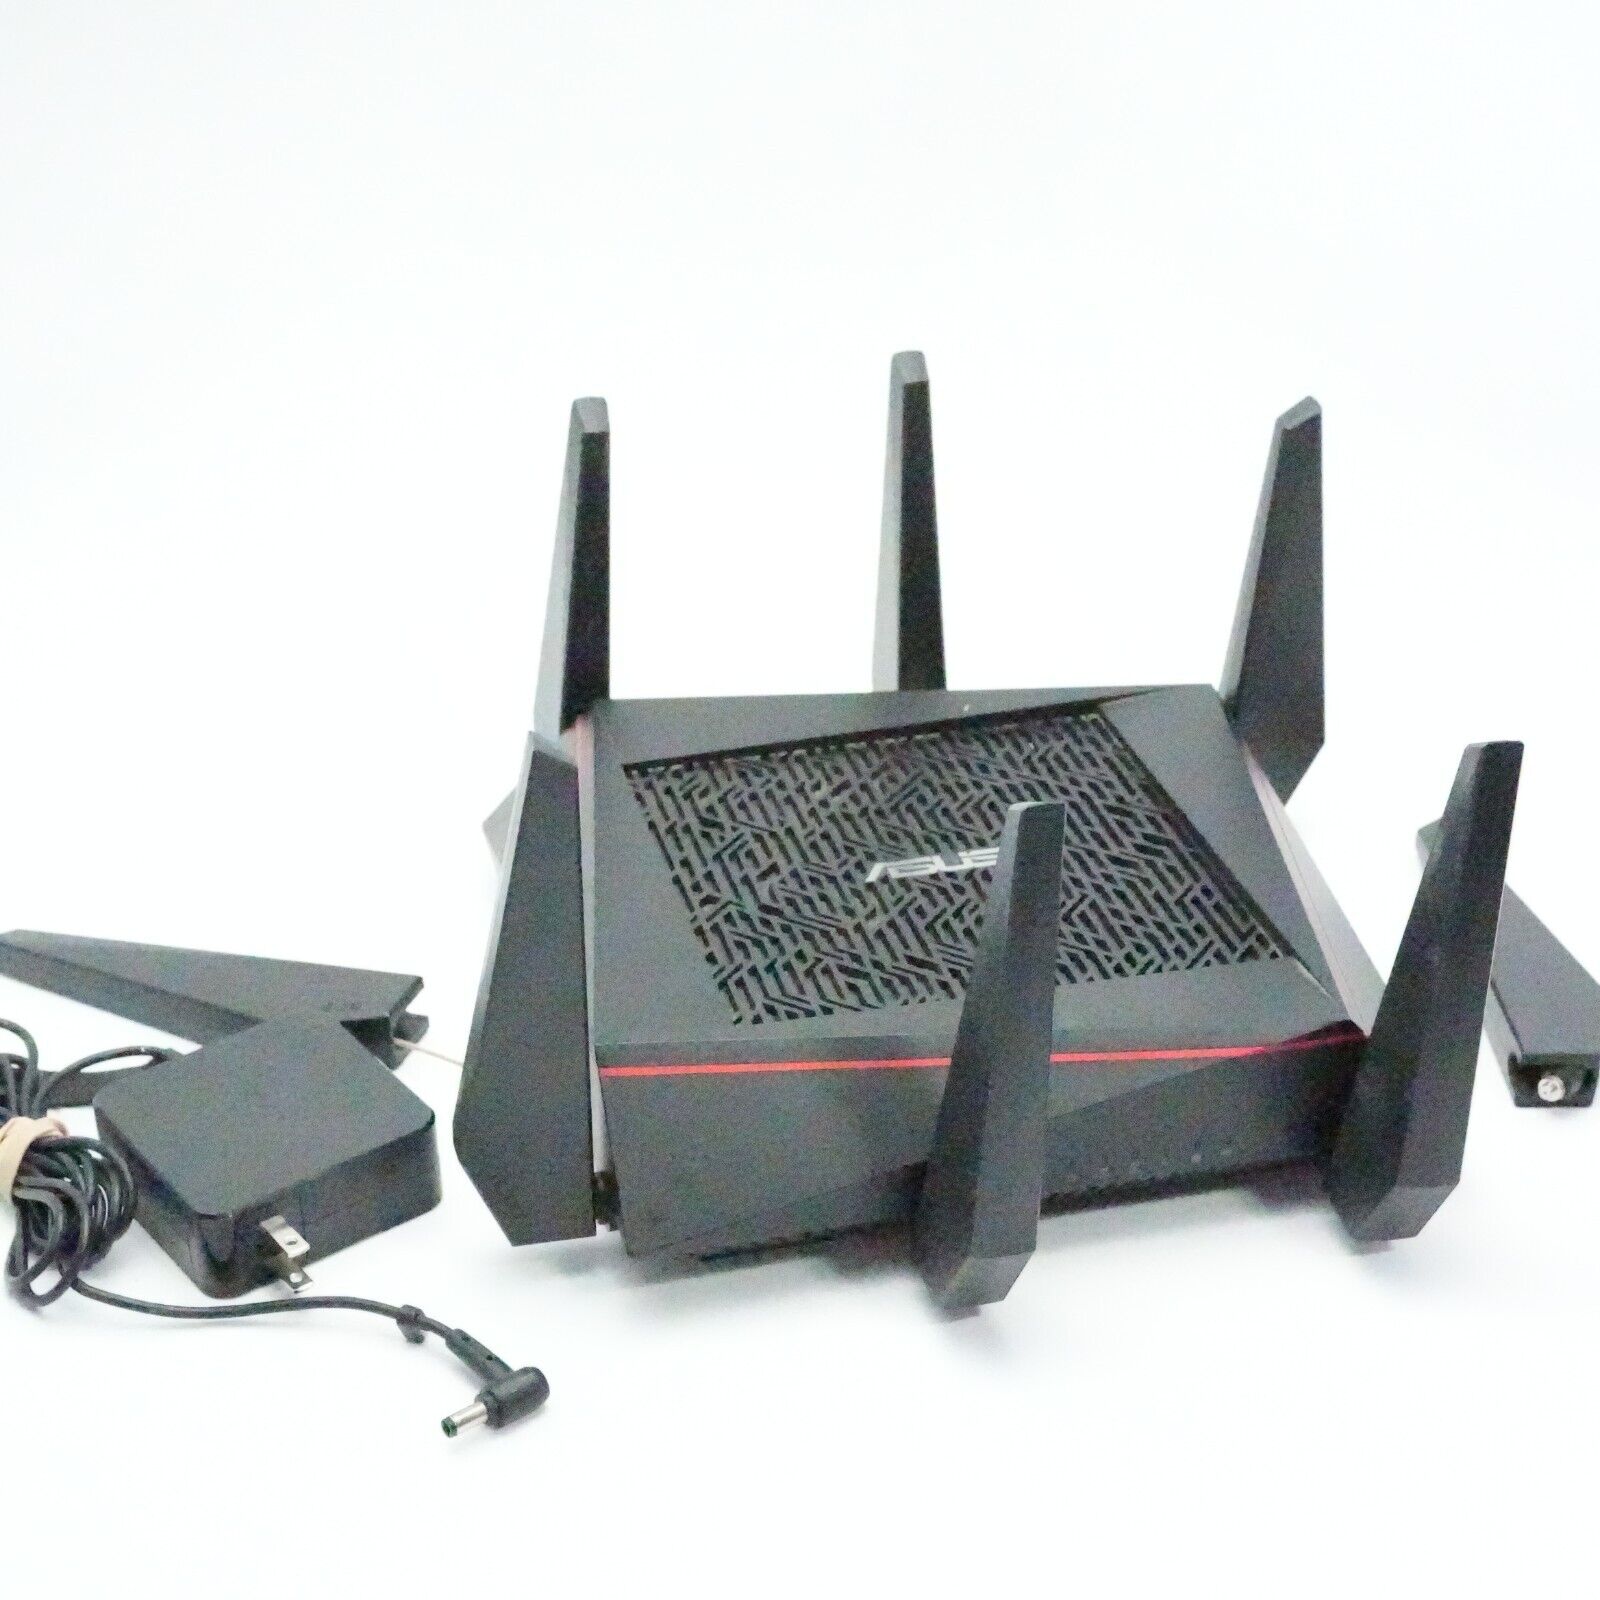 Asus RT-AC5300 Wireless Tri-Band Gigabit Router 2 Antenna Not Attached